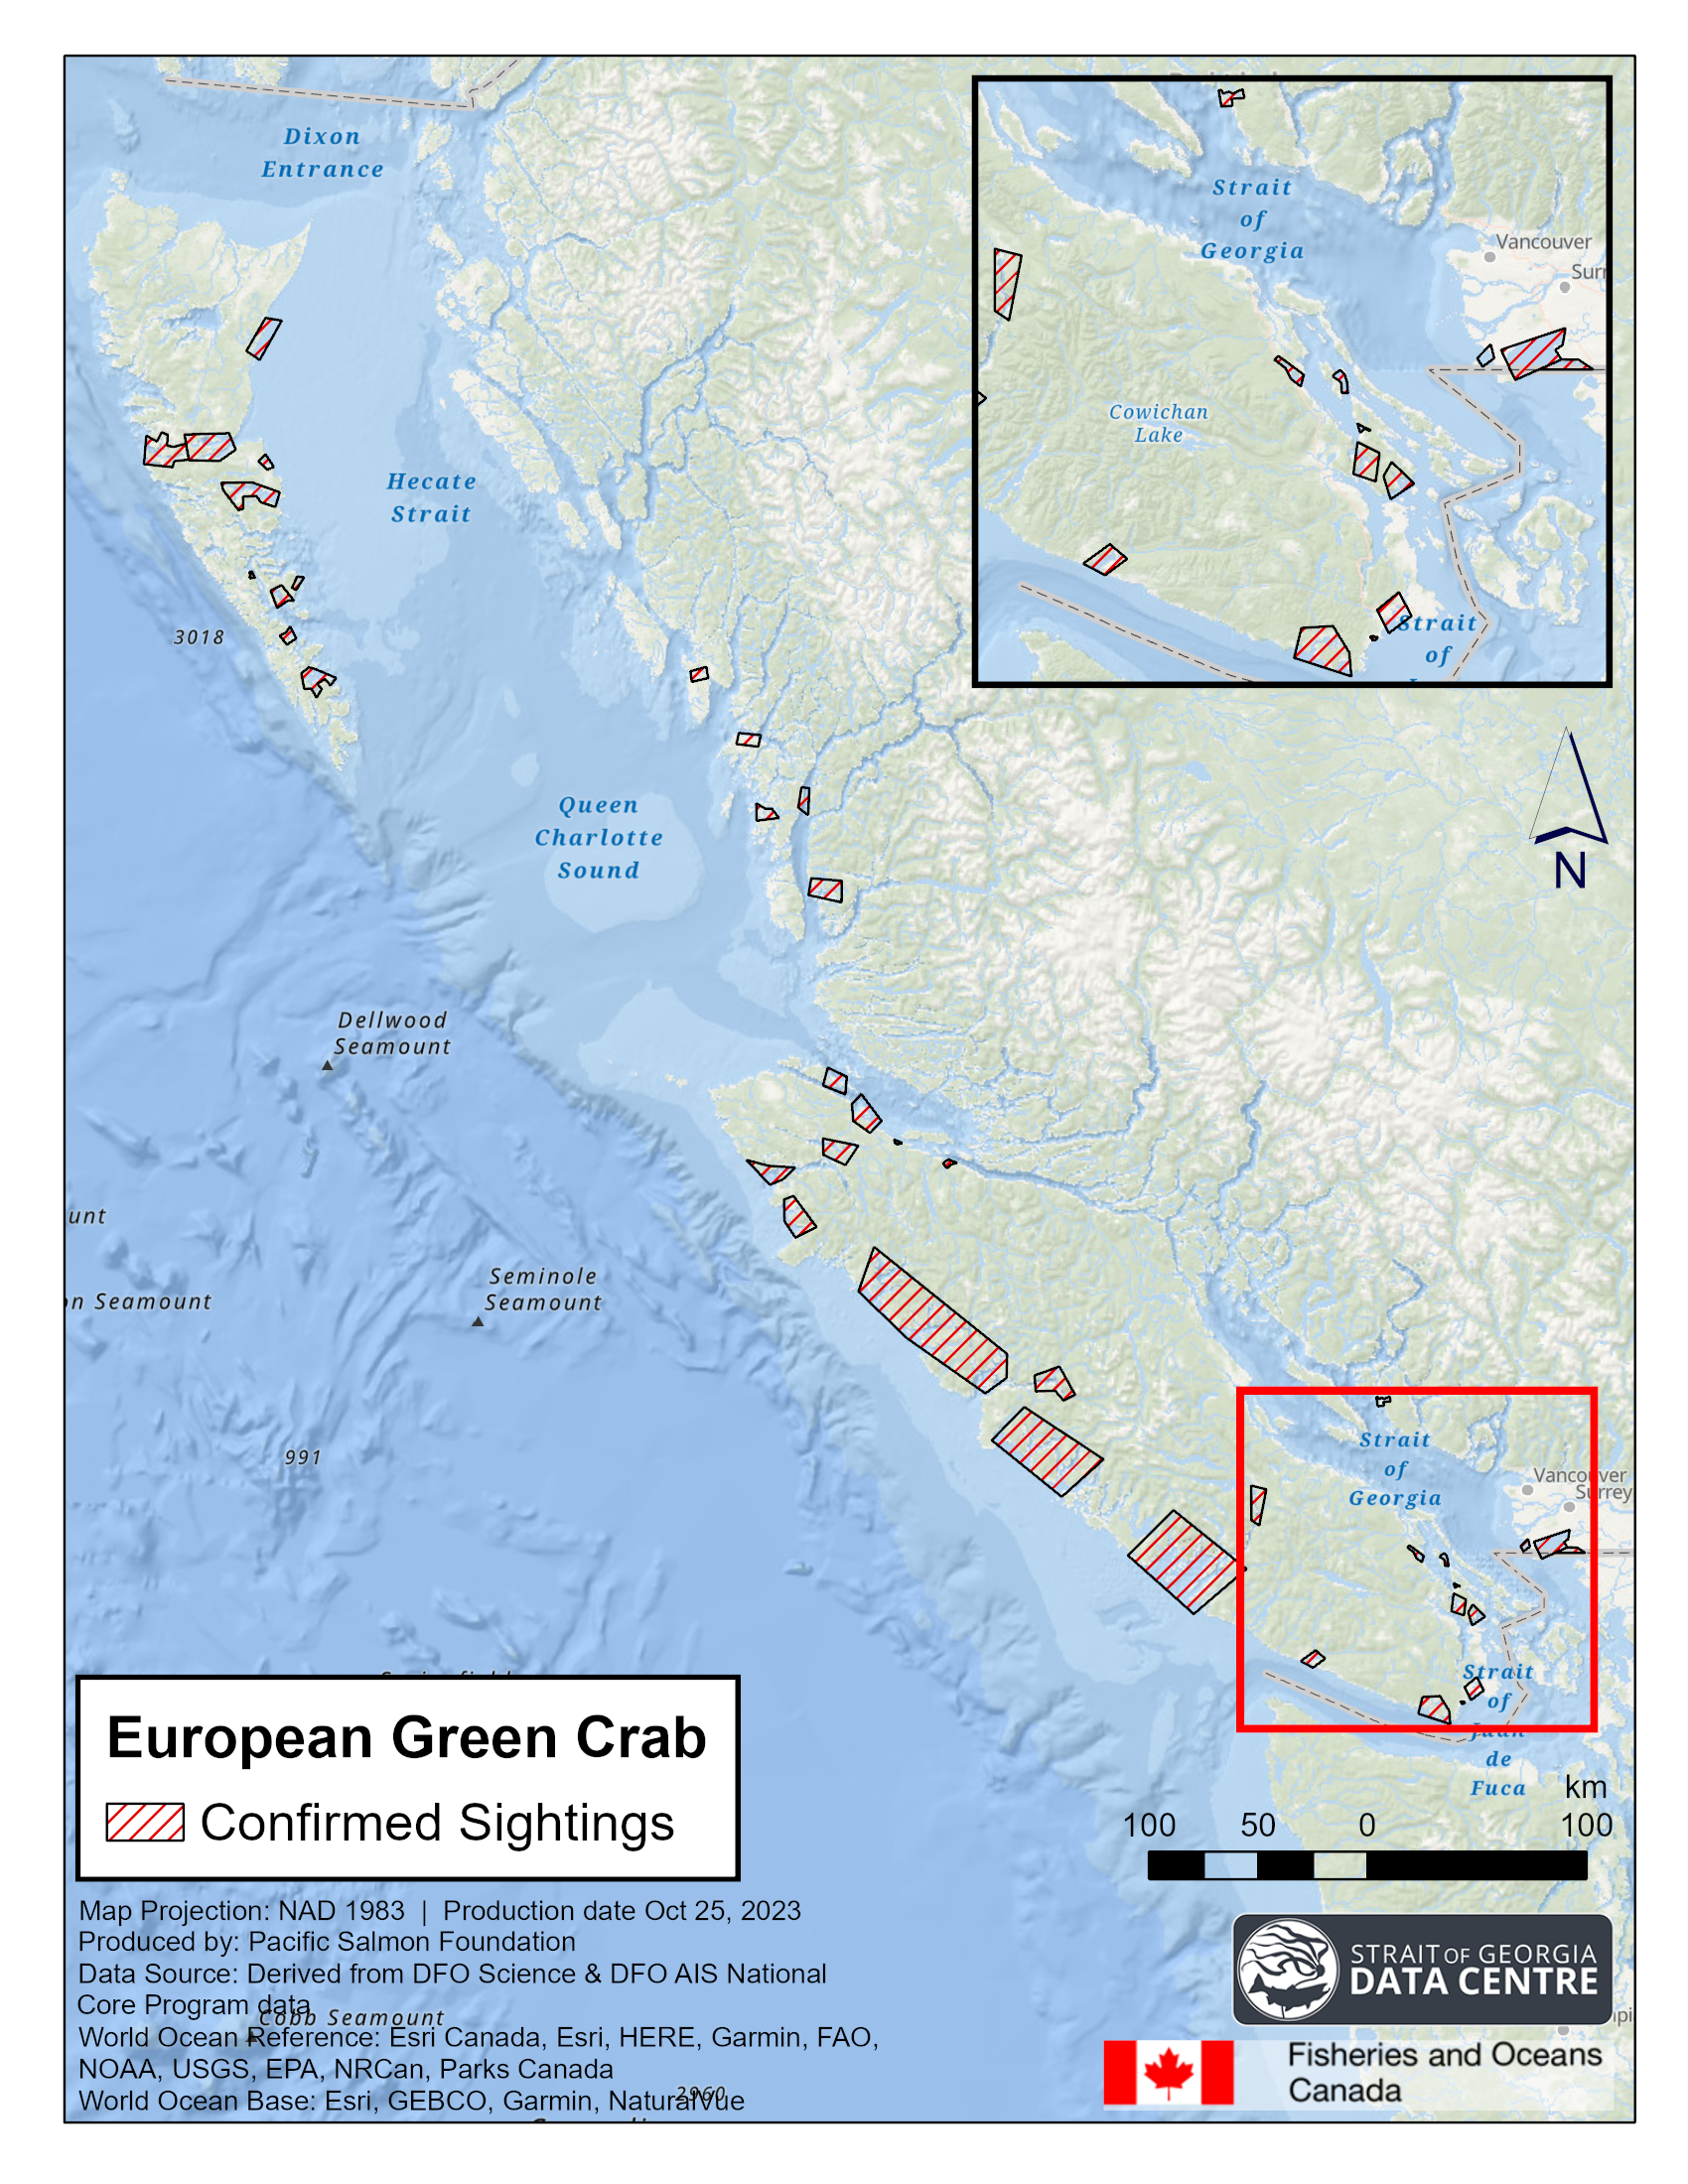 European-Green-Crab-confirmed-sightings-as-of-Oct.-2023-Strait-of-Georgia-Data-Centre